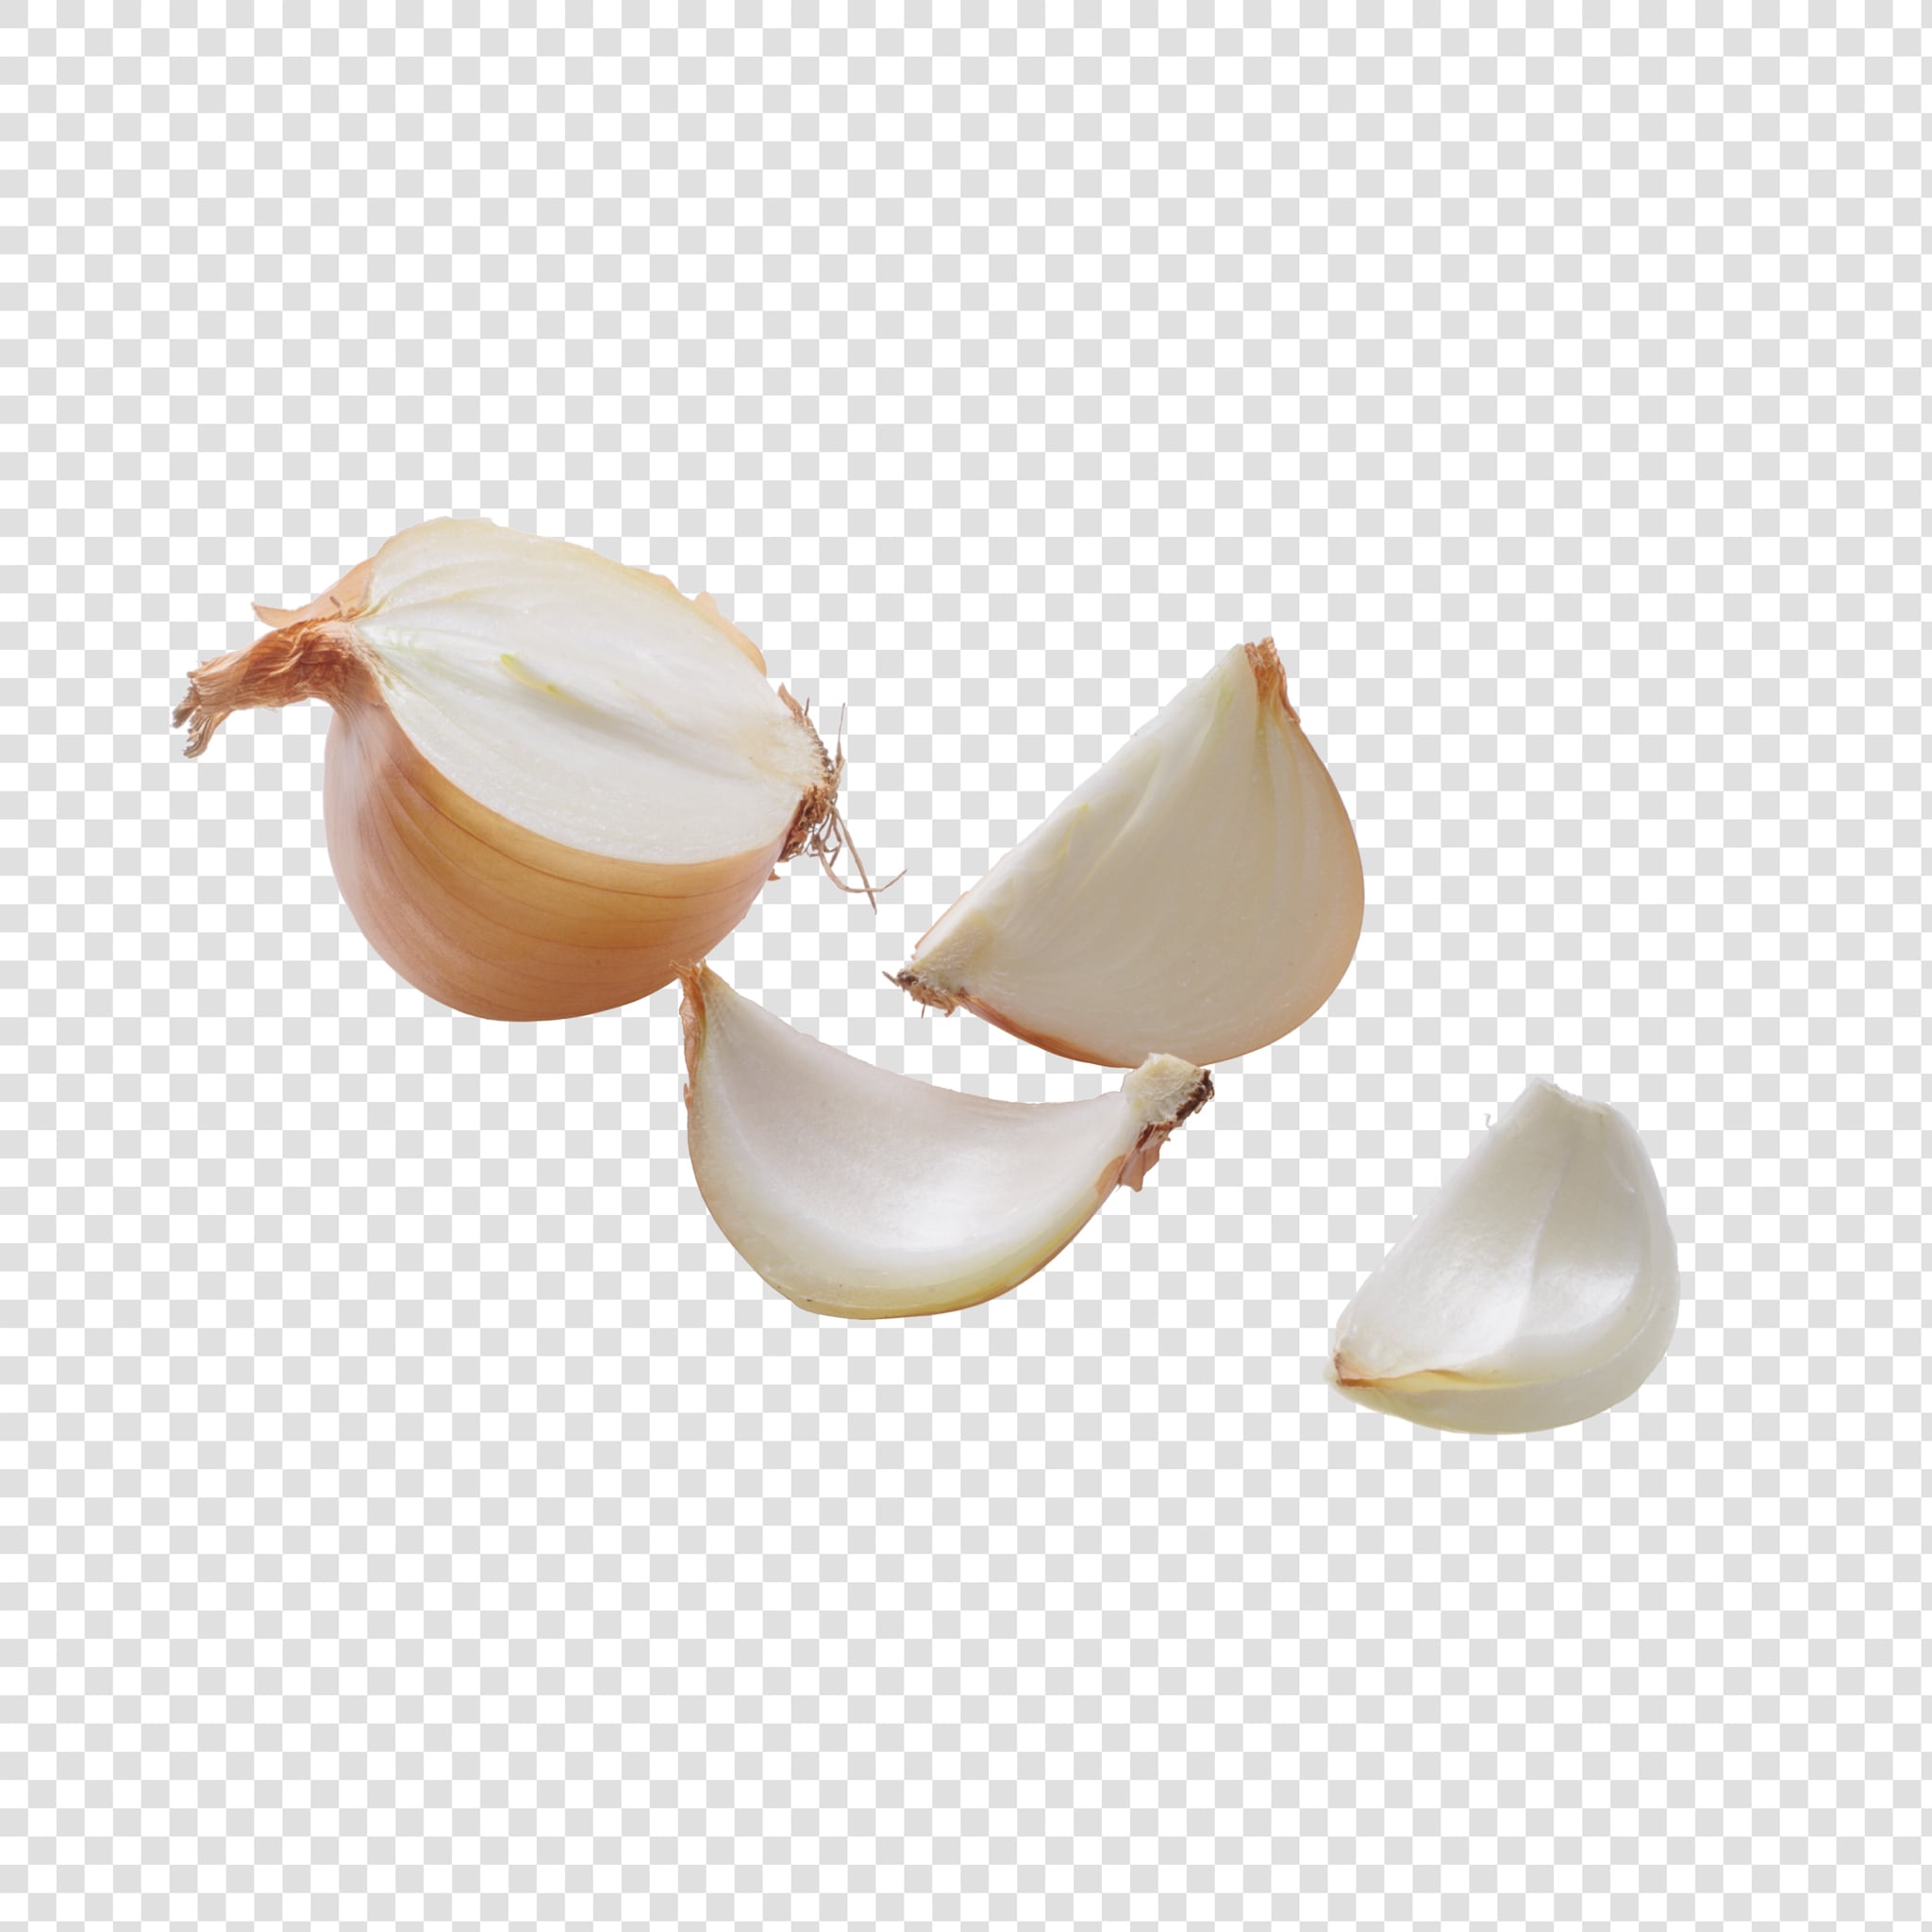 Onion image with transparent background